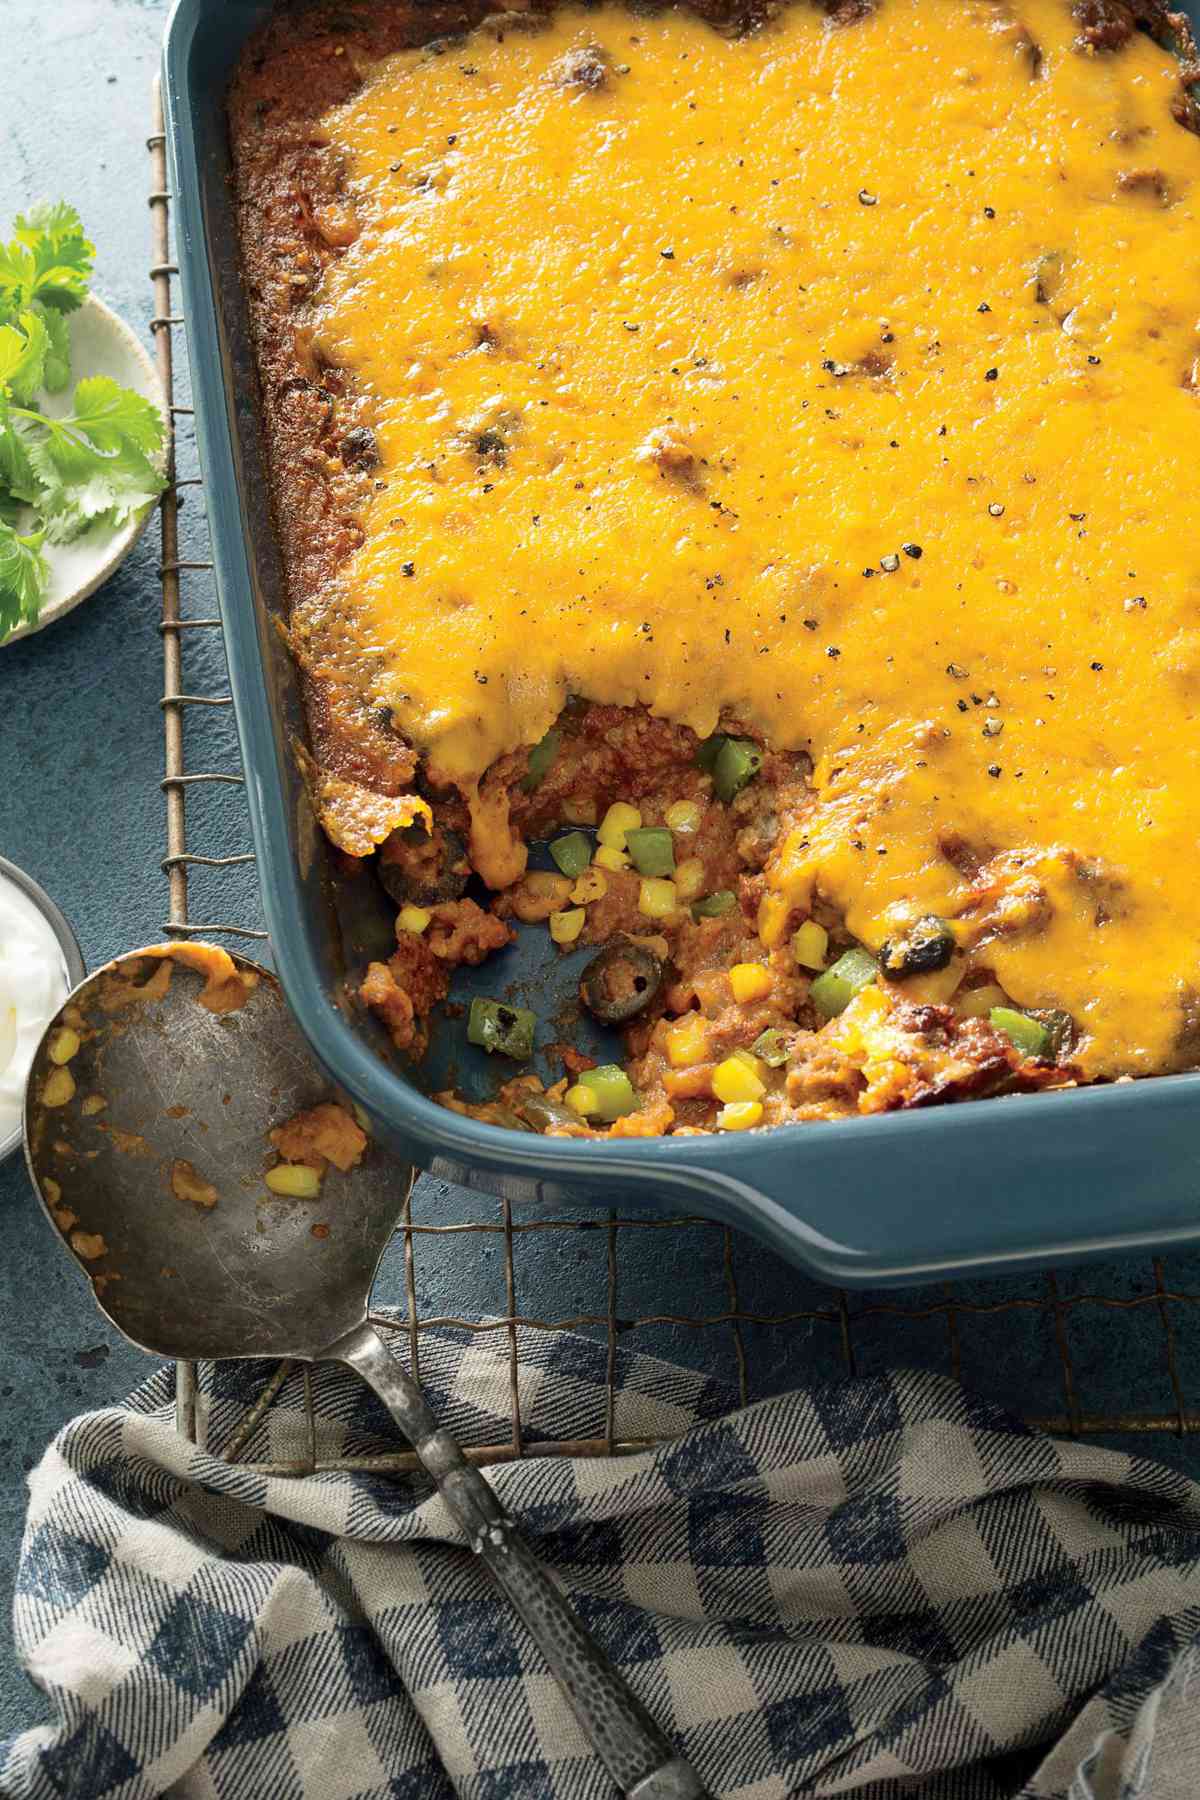 Deb Wise's Tamale Pie Mix-up